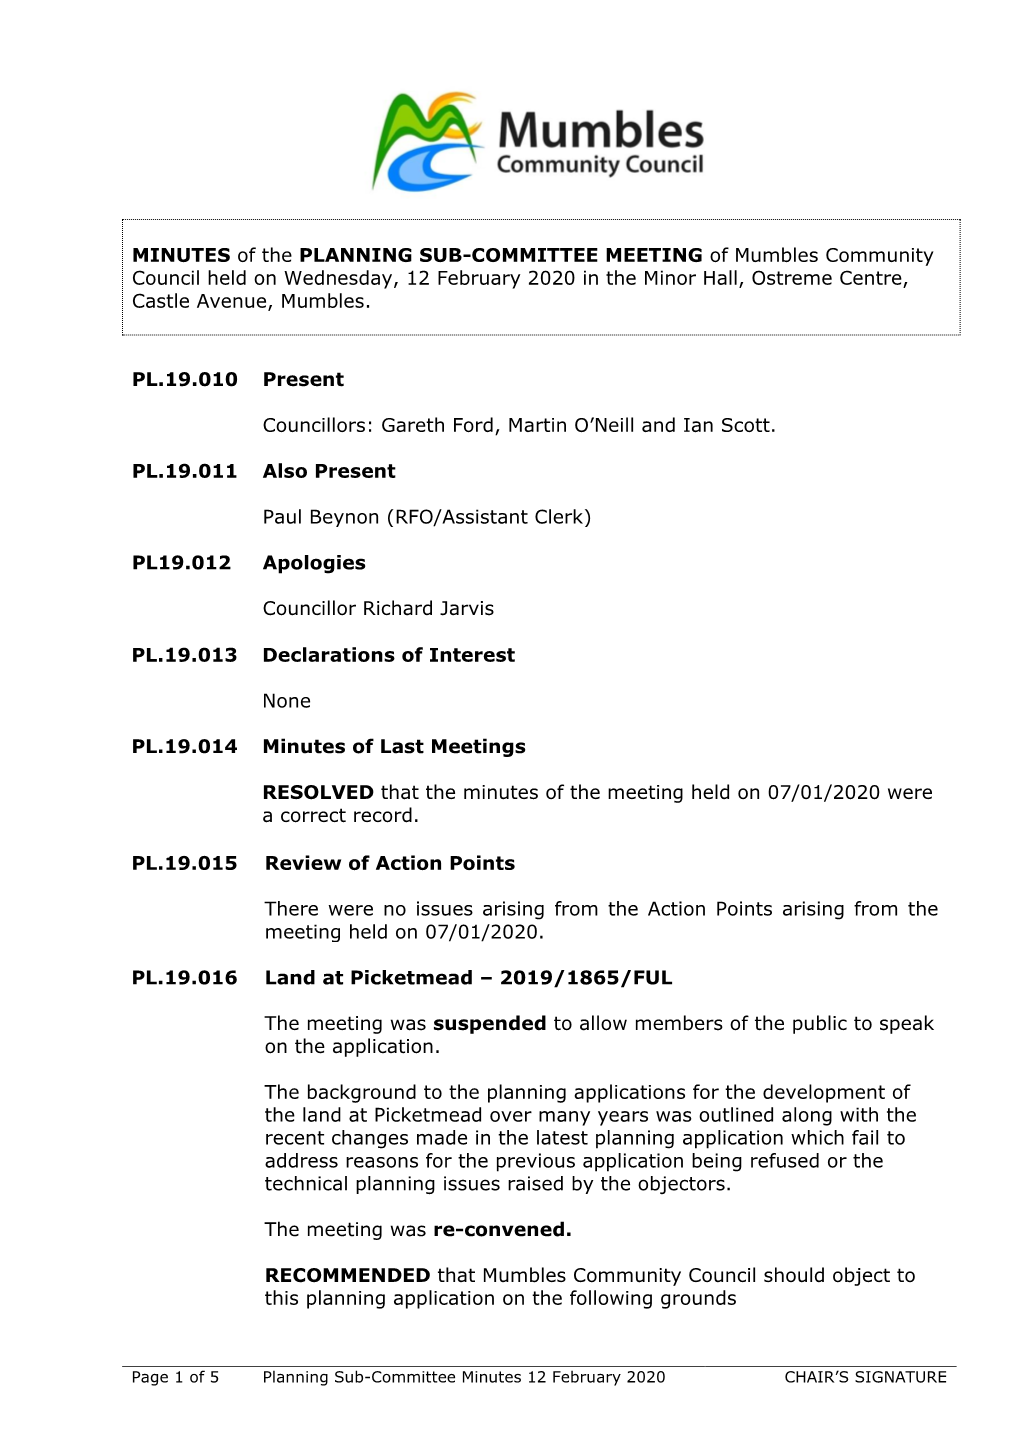 MINUTES of the PLANNING SUB-COMMITTEE MEETING Of